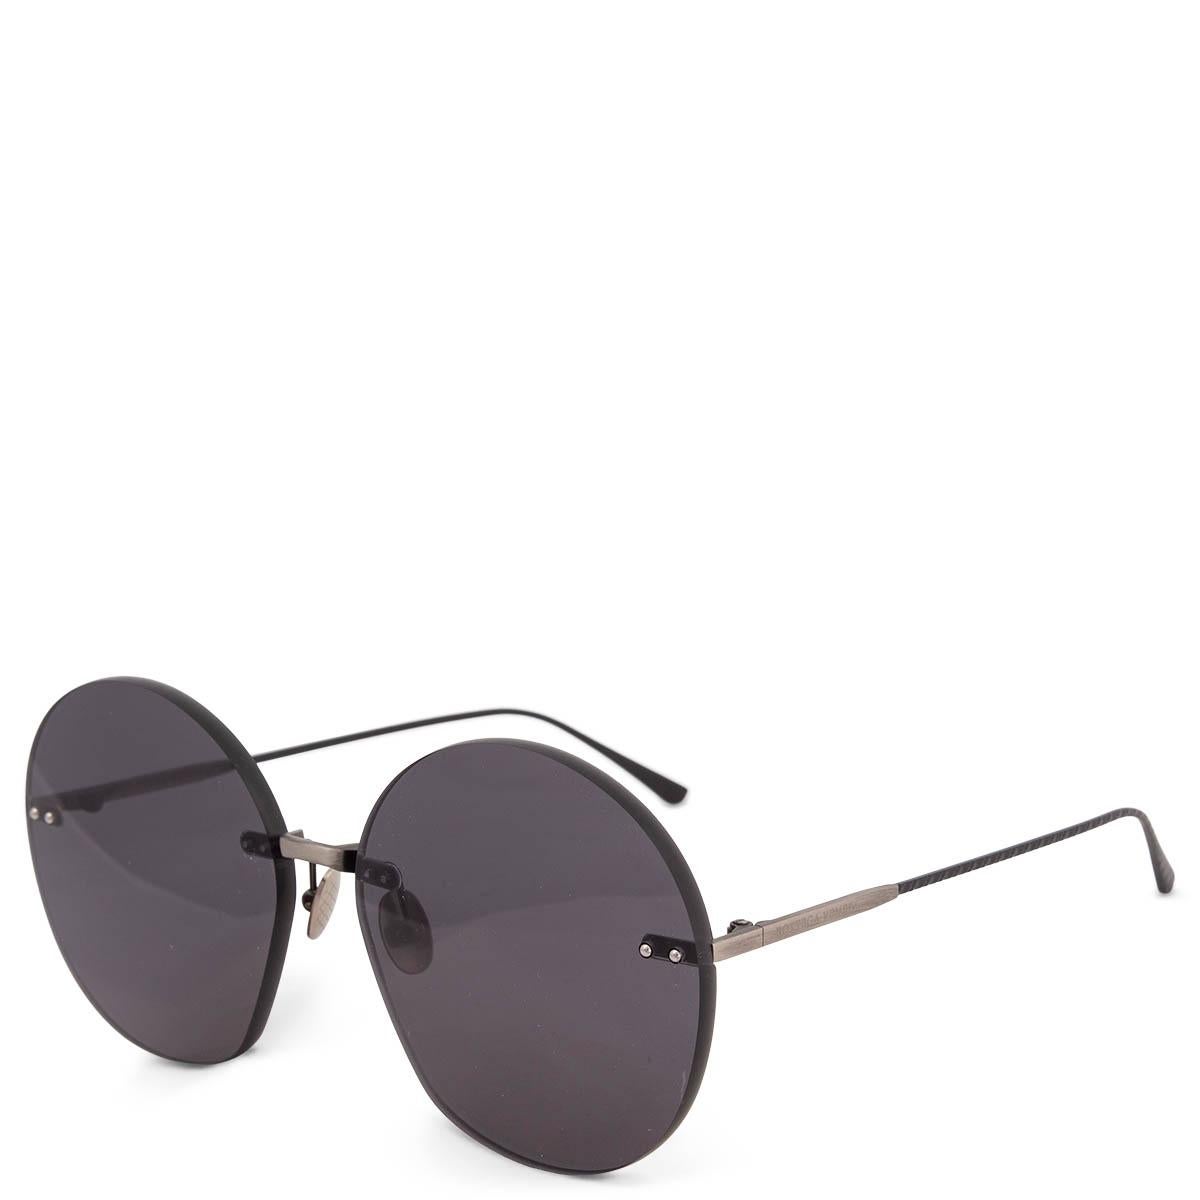 100% authentic Bottega Veneta BV0178S round shaped sunglasses in grey acetate with black lenses.  Have been worn and are in excellent condition. Without a case. 

Measurements
Model	Bottega Veneta BV0178S Sunglasses Grey
Width	14cm